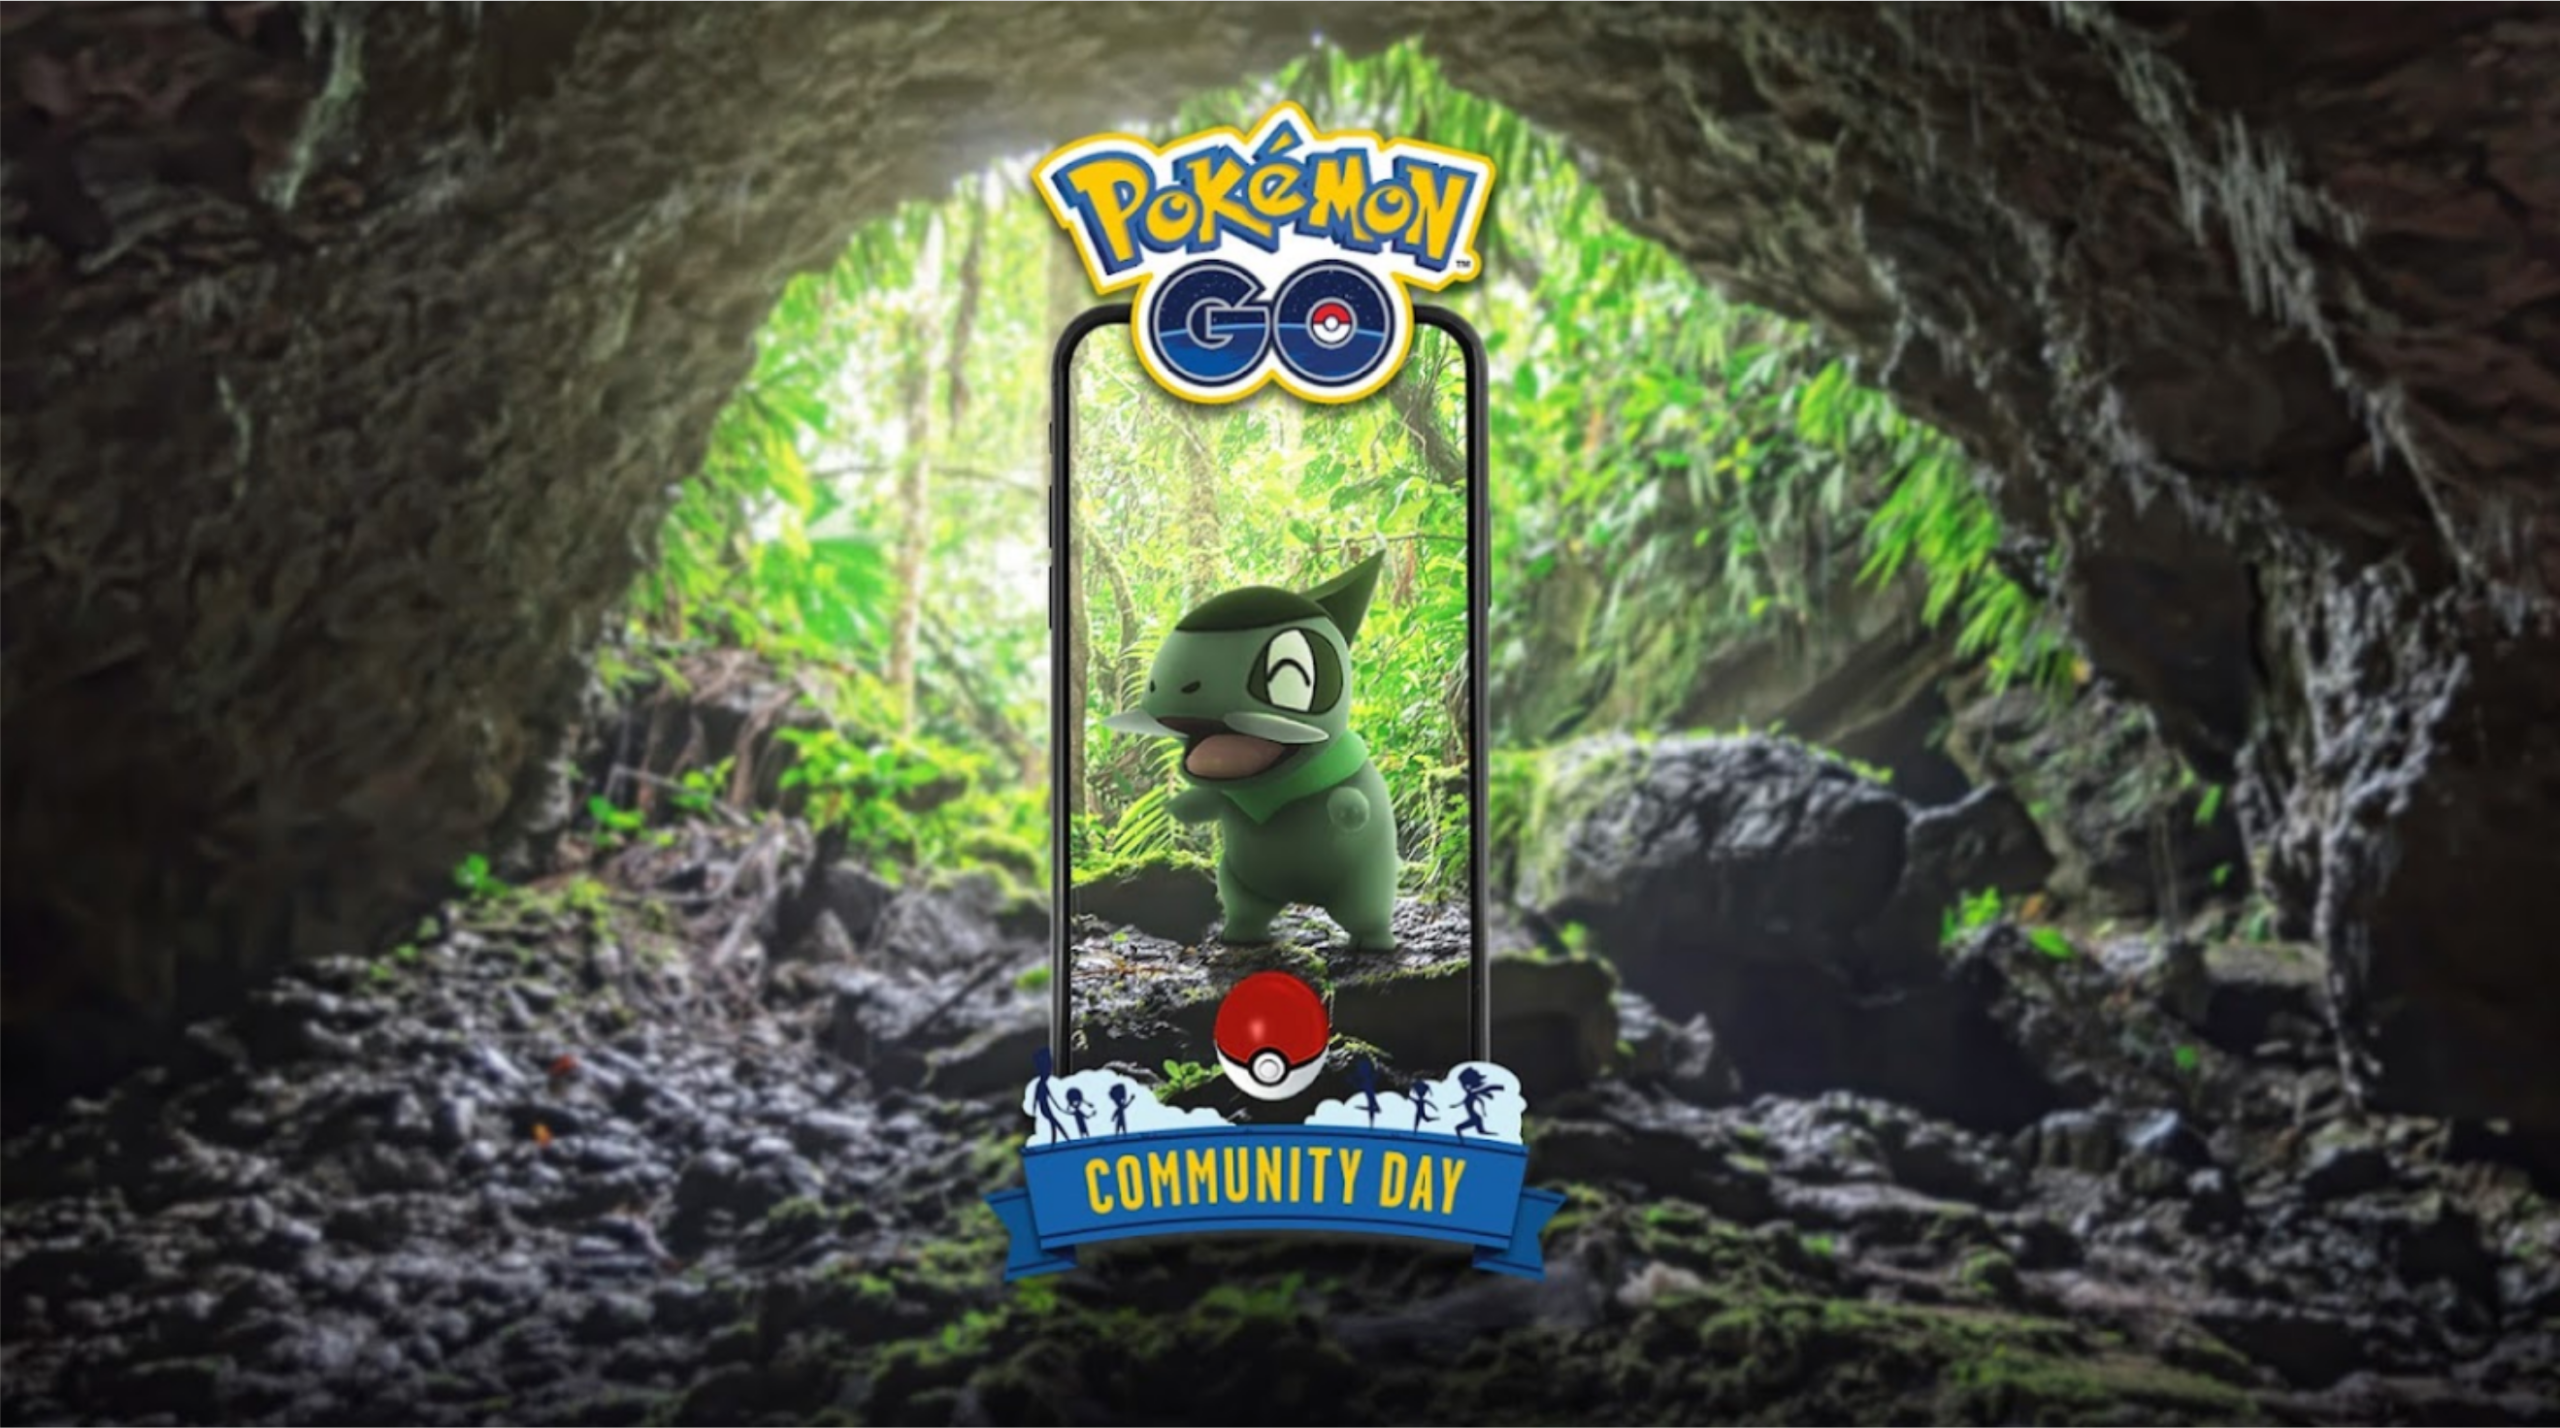 Team GO Rocket Returns and Shiny Fomantis Debuts during the Solstice  Horizons Event in Pokémon GO